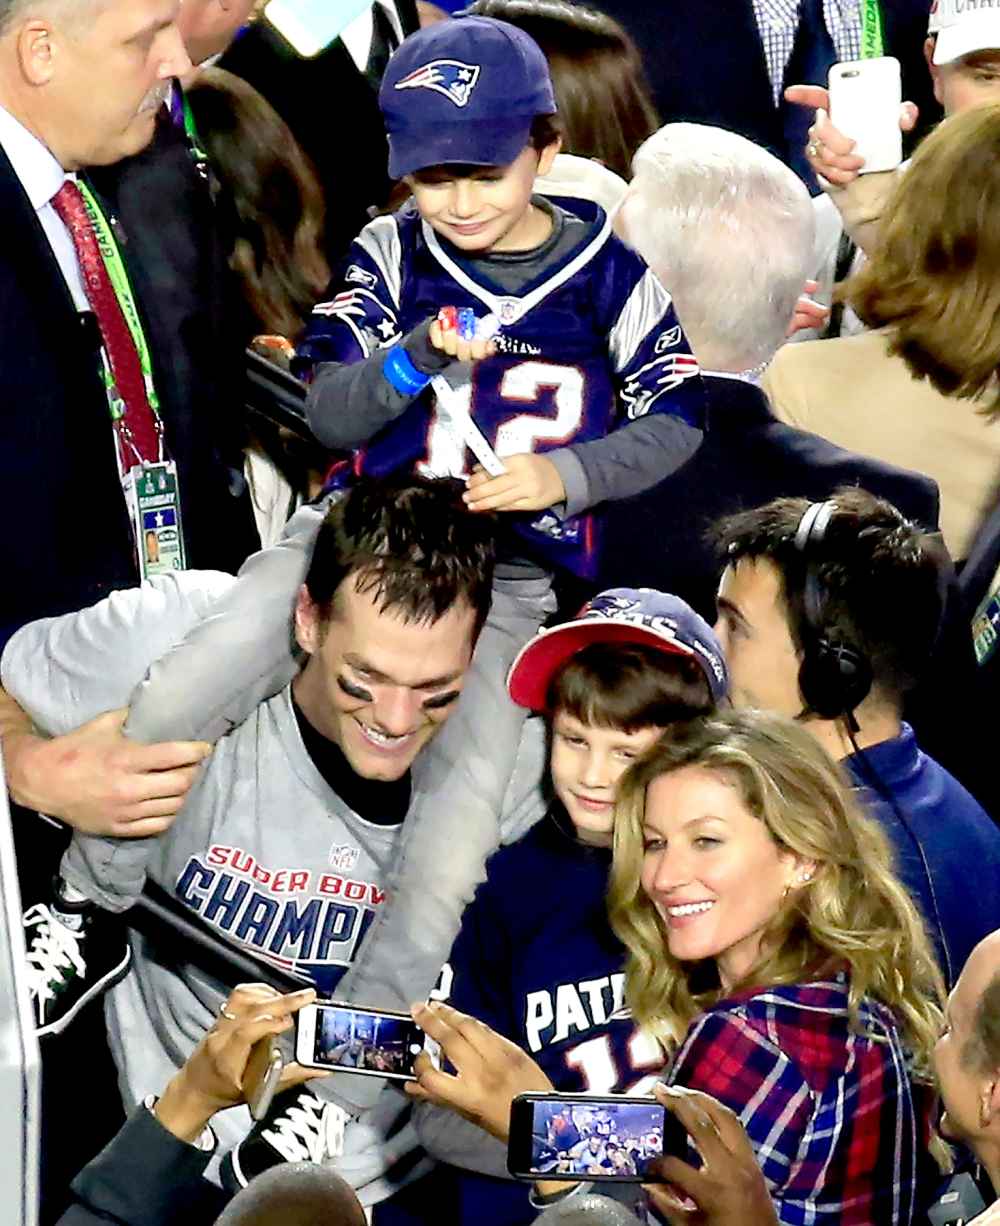 Tom Brady #12 of the New England Patriots celebrates defeating the Seattle Seahawks with his wife Gisele Bundchen and son Benjamin during Super Bowl XLIX at University of Phoenix Stadium on February 1, 2015 in Glendale, Arizona.